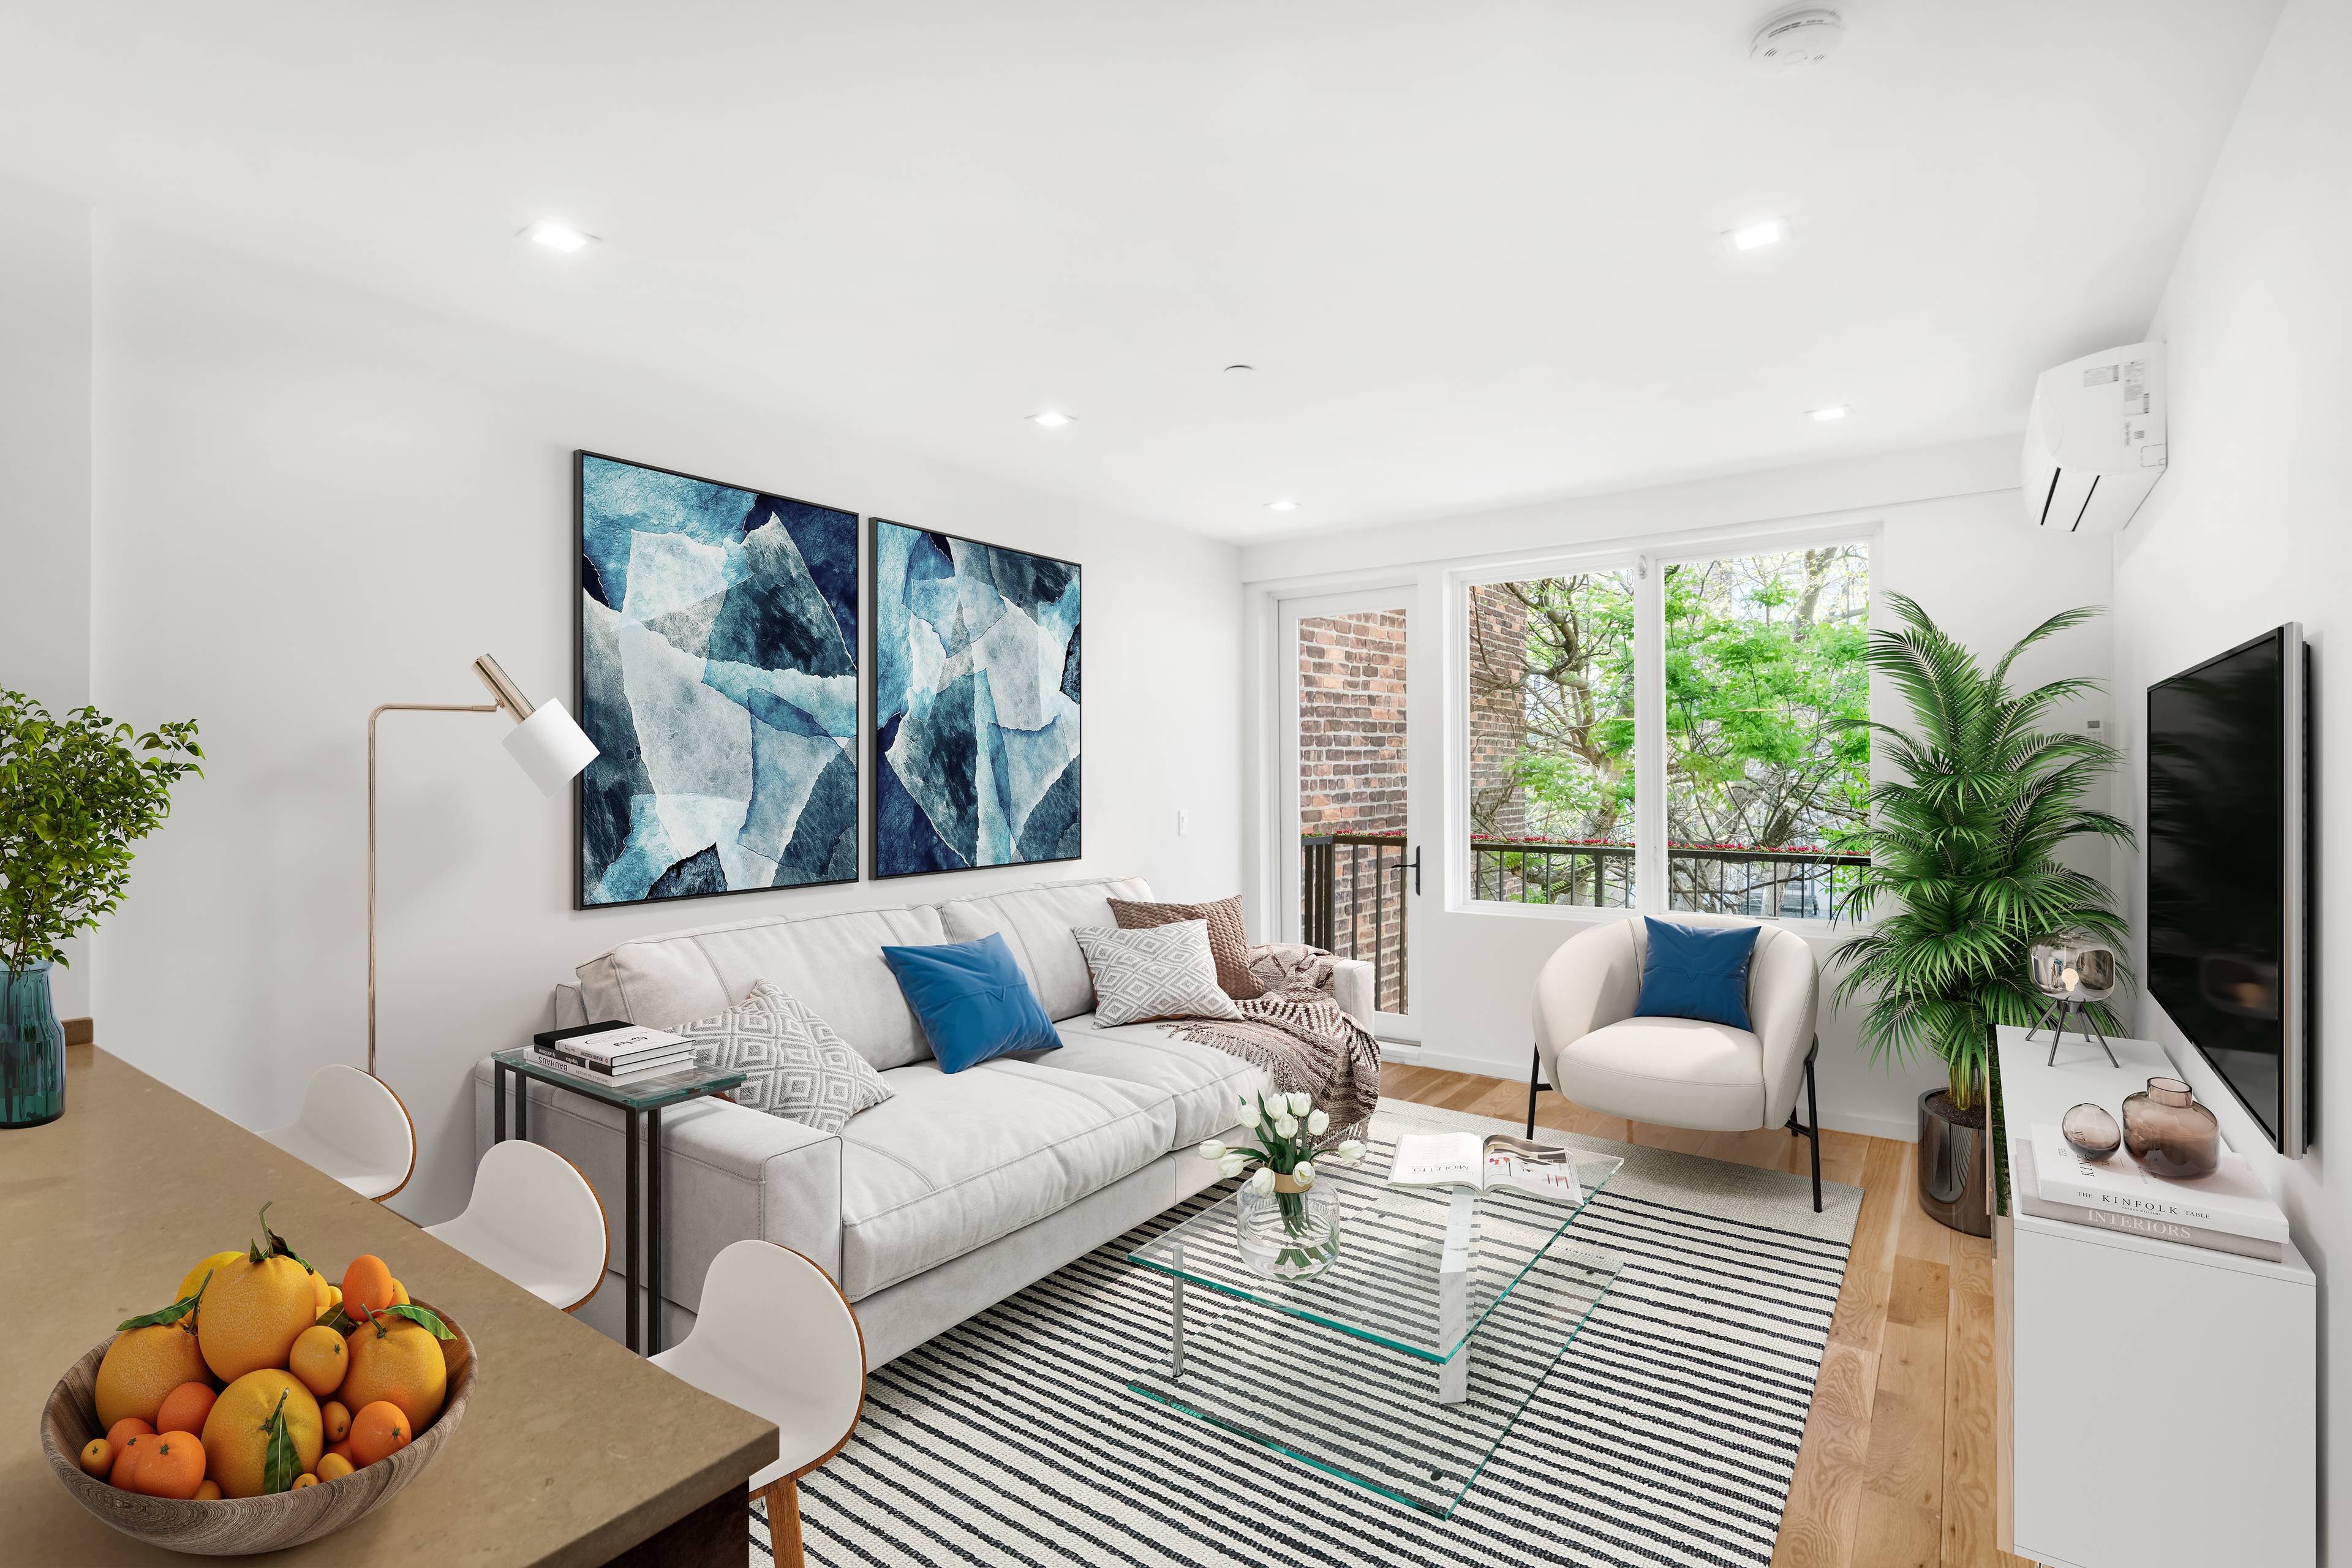 Enjoy a sleek modern design and unlimited sunshine in this bright and beautiful new construction one bedroom home in the perfect Bed Stuy Bushwick neighborhood !